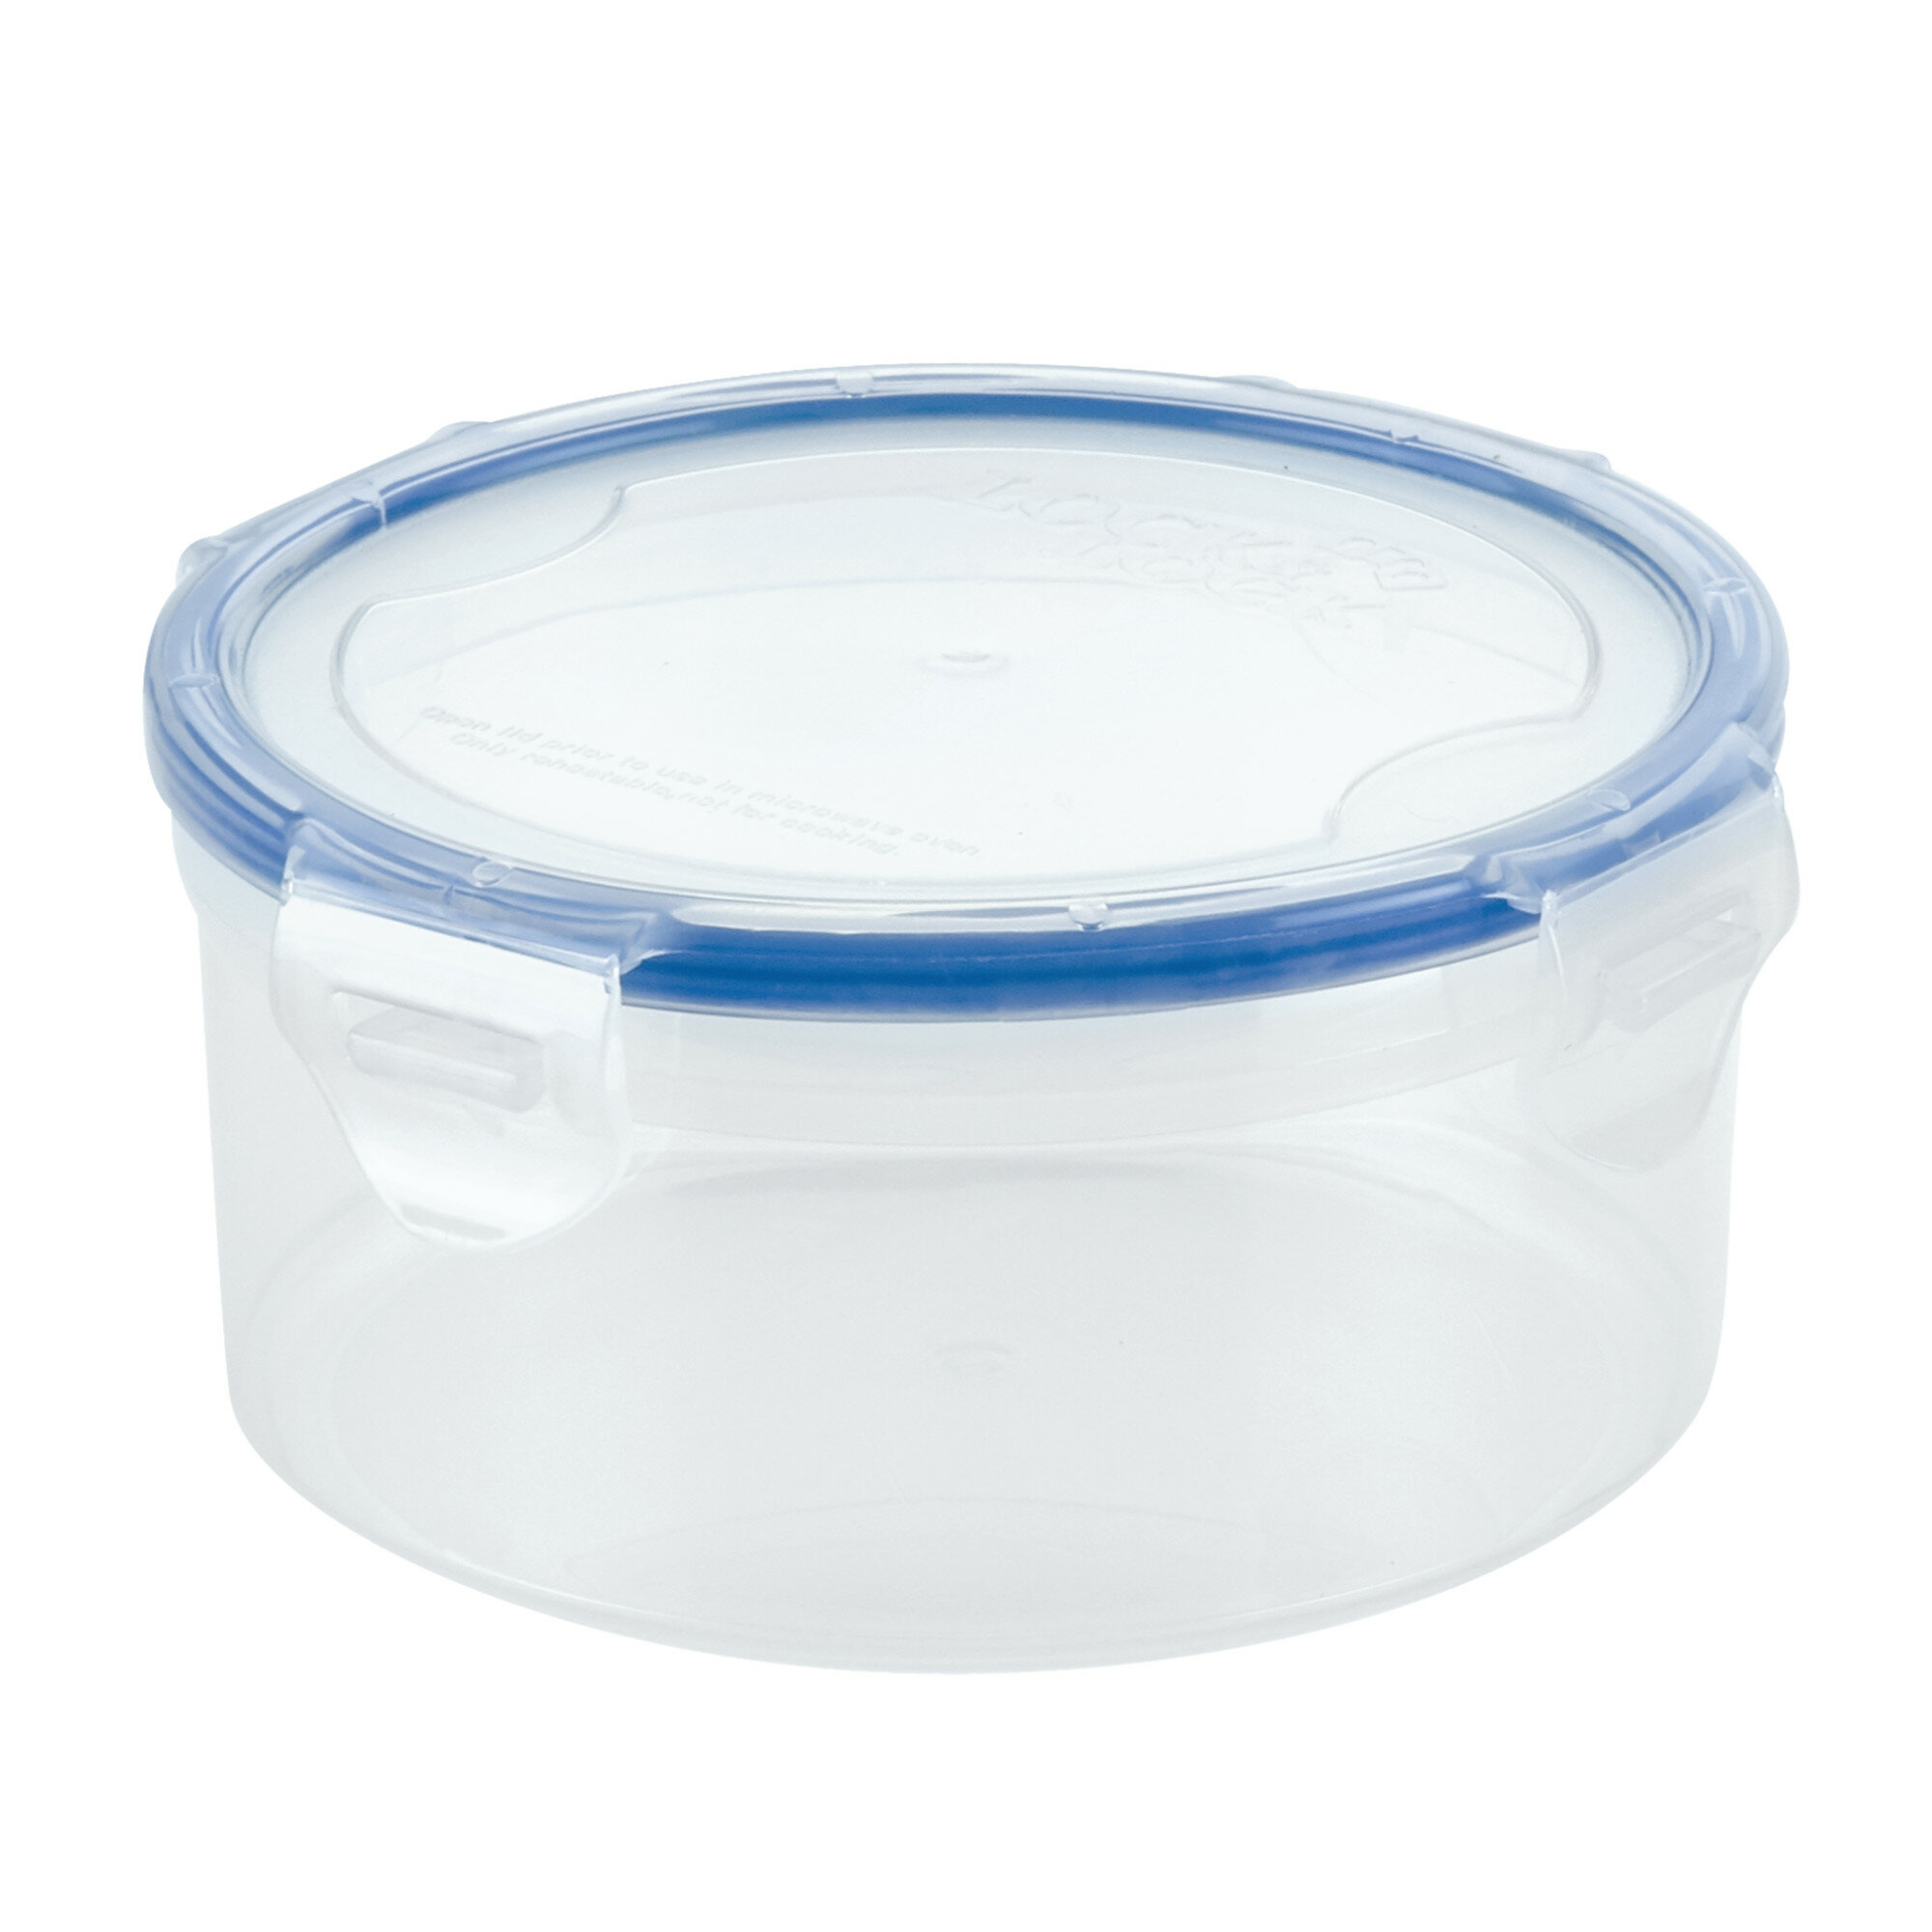 LocknLock Easy Essentials Twist Food Storage lids/Airtight containers, BPA  Free, Tall-44 oz-for Pasta, Clear 1 Count (Pack of 1) 